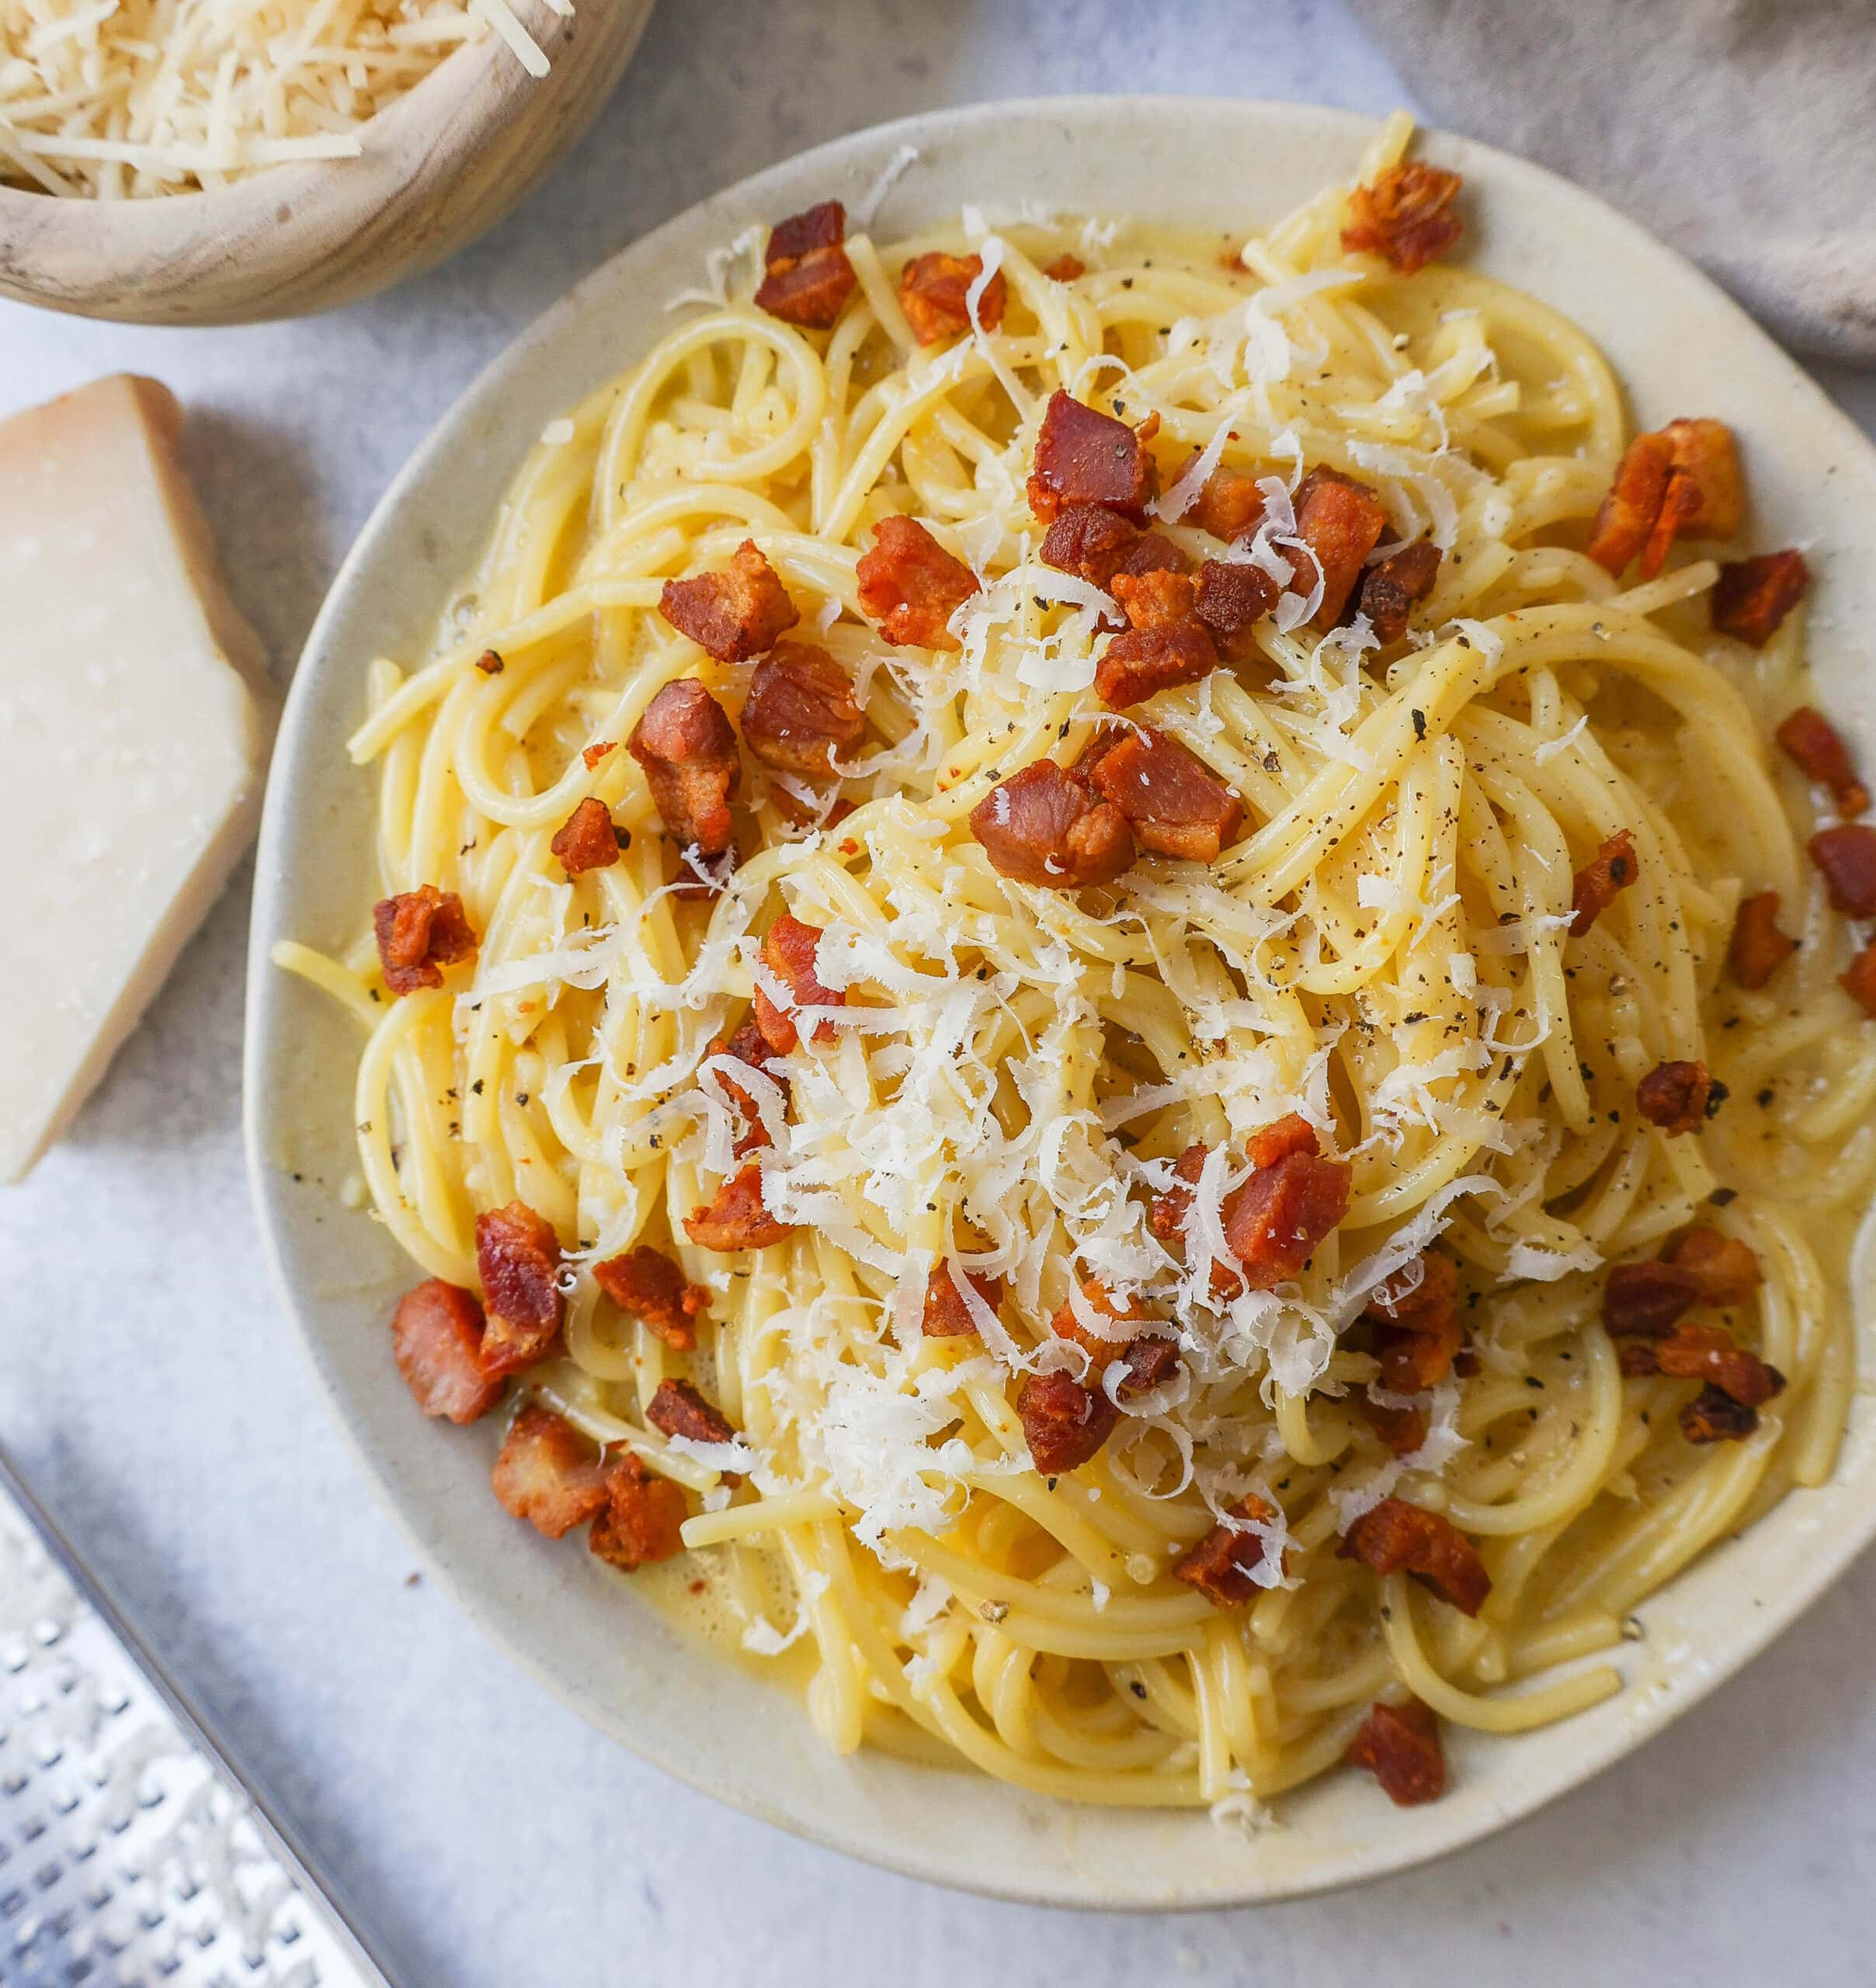 One of the 100 ways to cook an egg is this delicious spaghetti carbonara on a white plate.